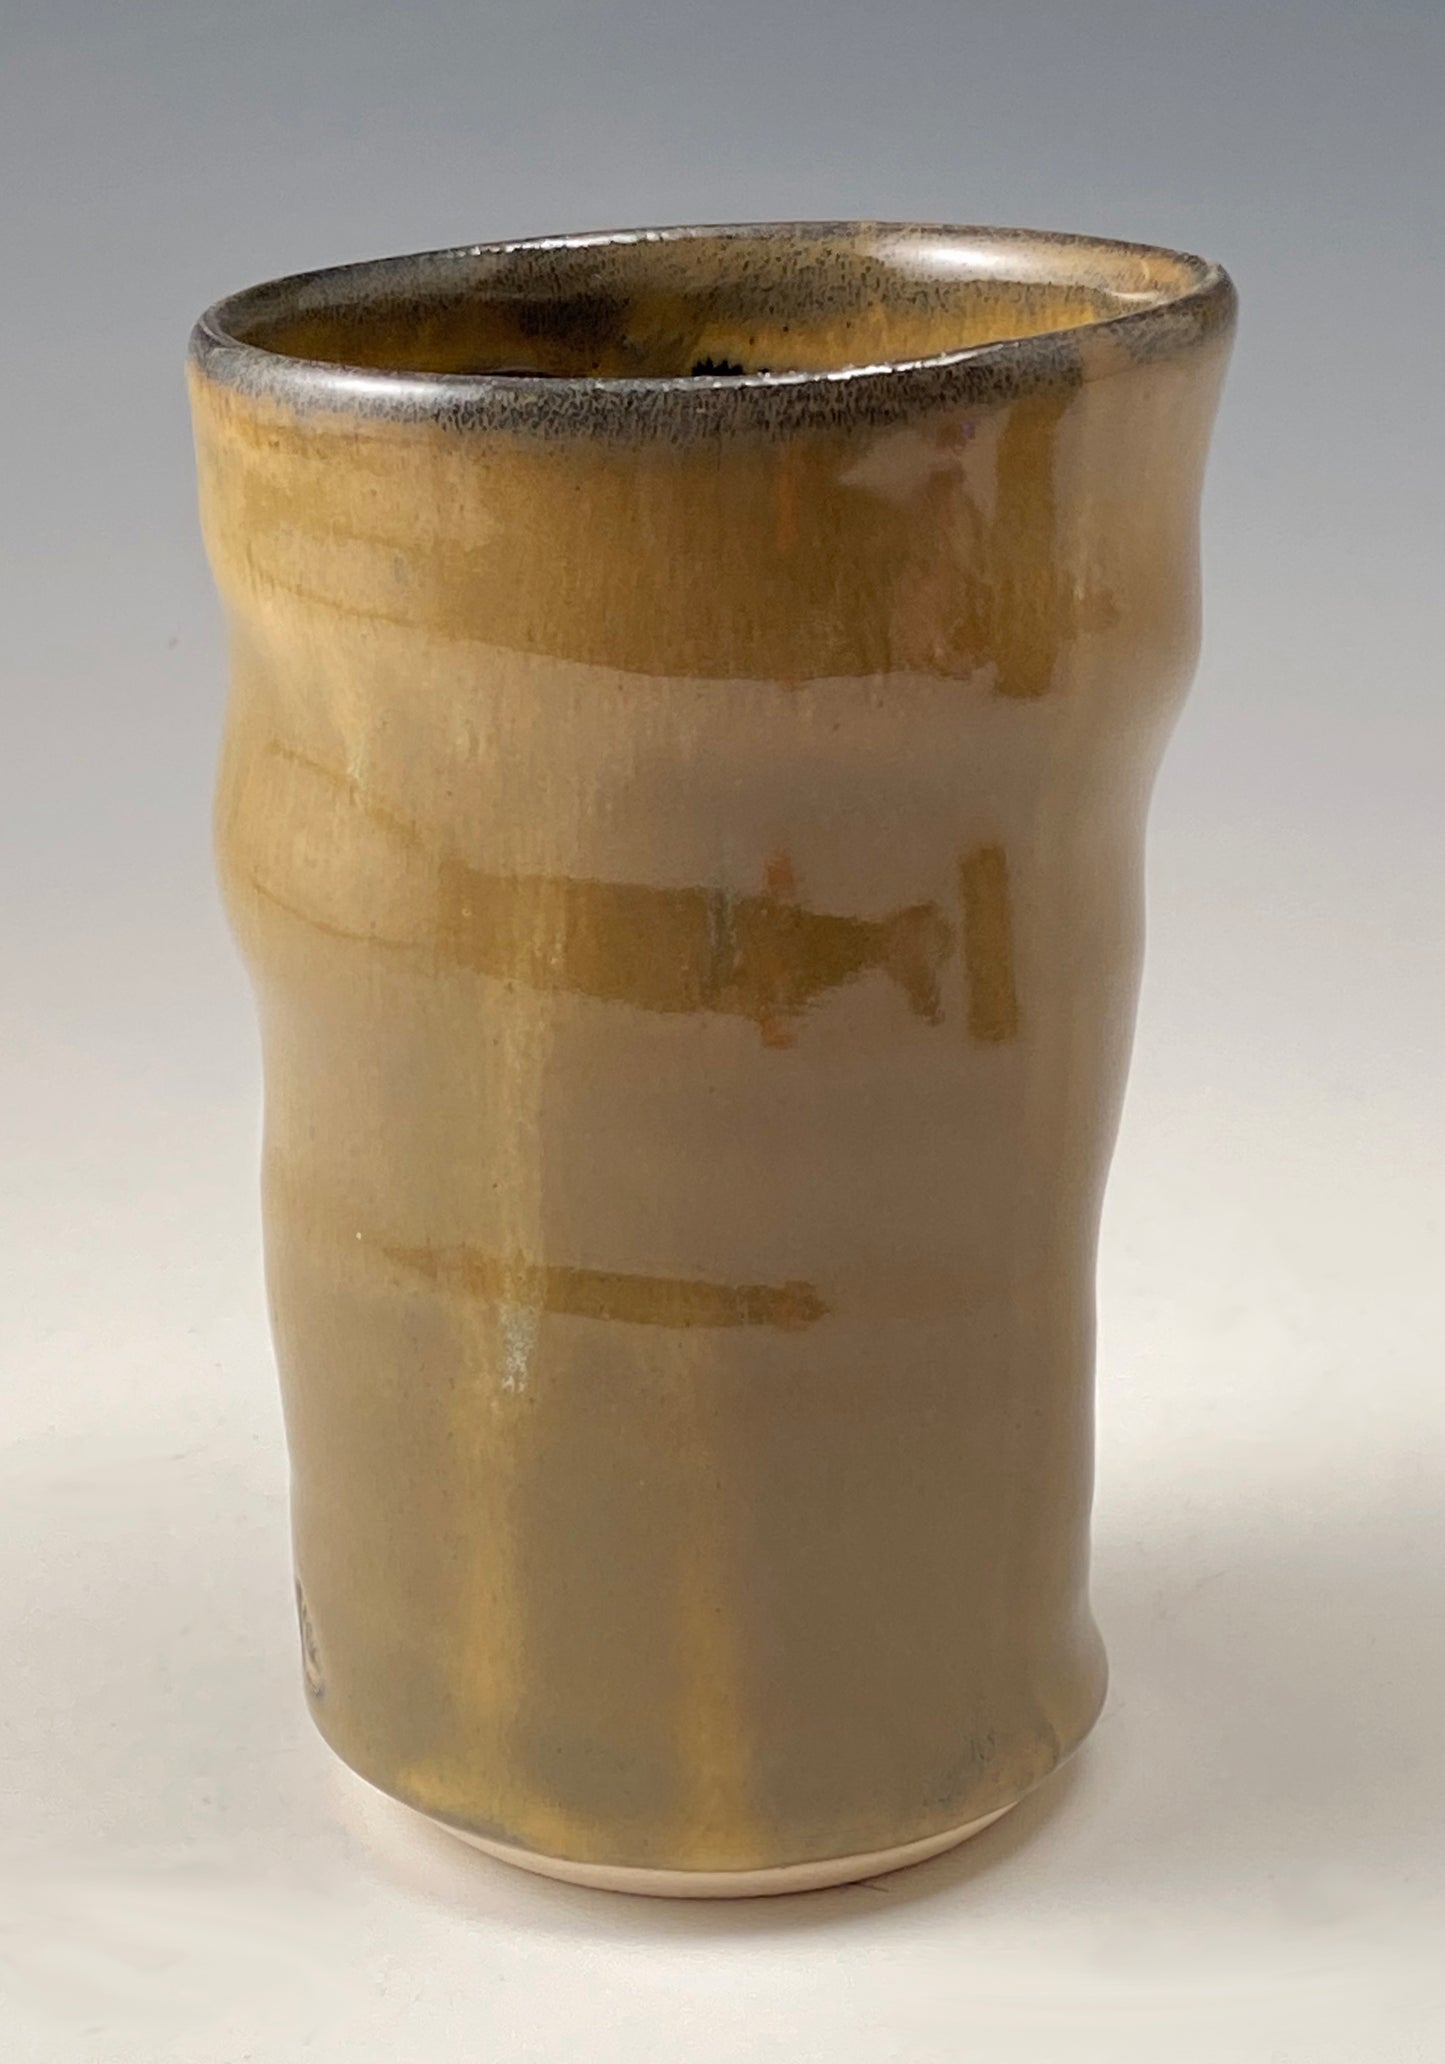 Handmade Pottery. Stoneware cup with amber-colored glaze on exterior. Black glaze on interior.